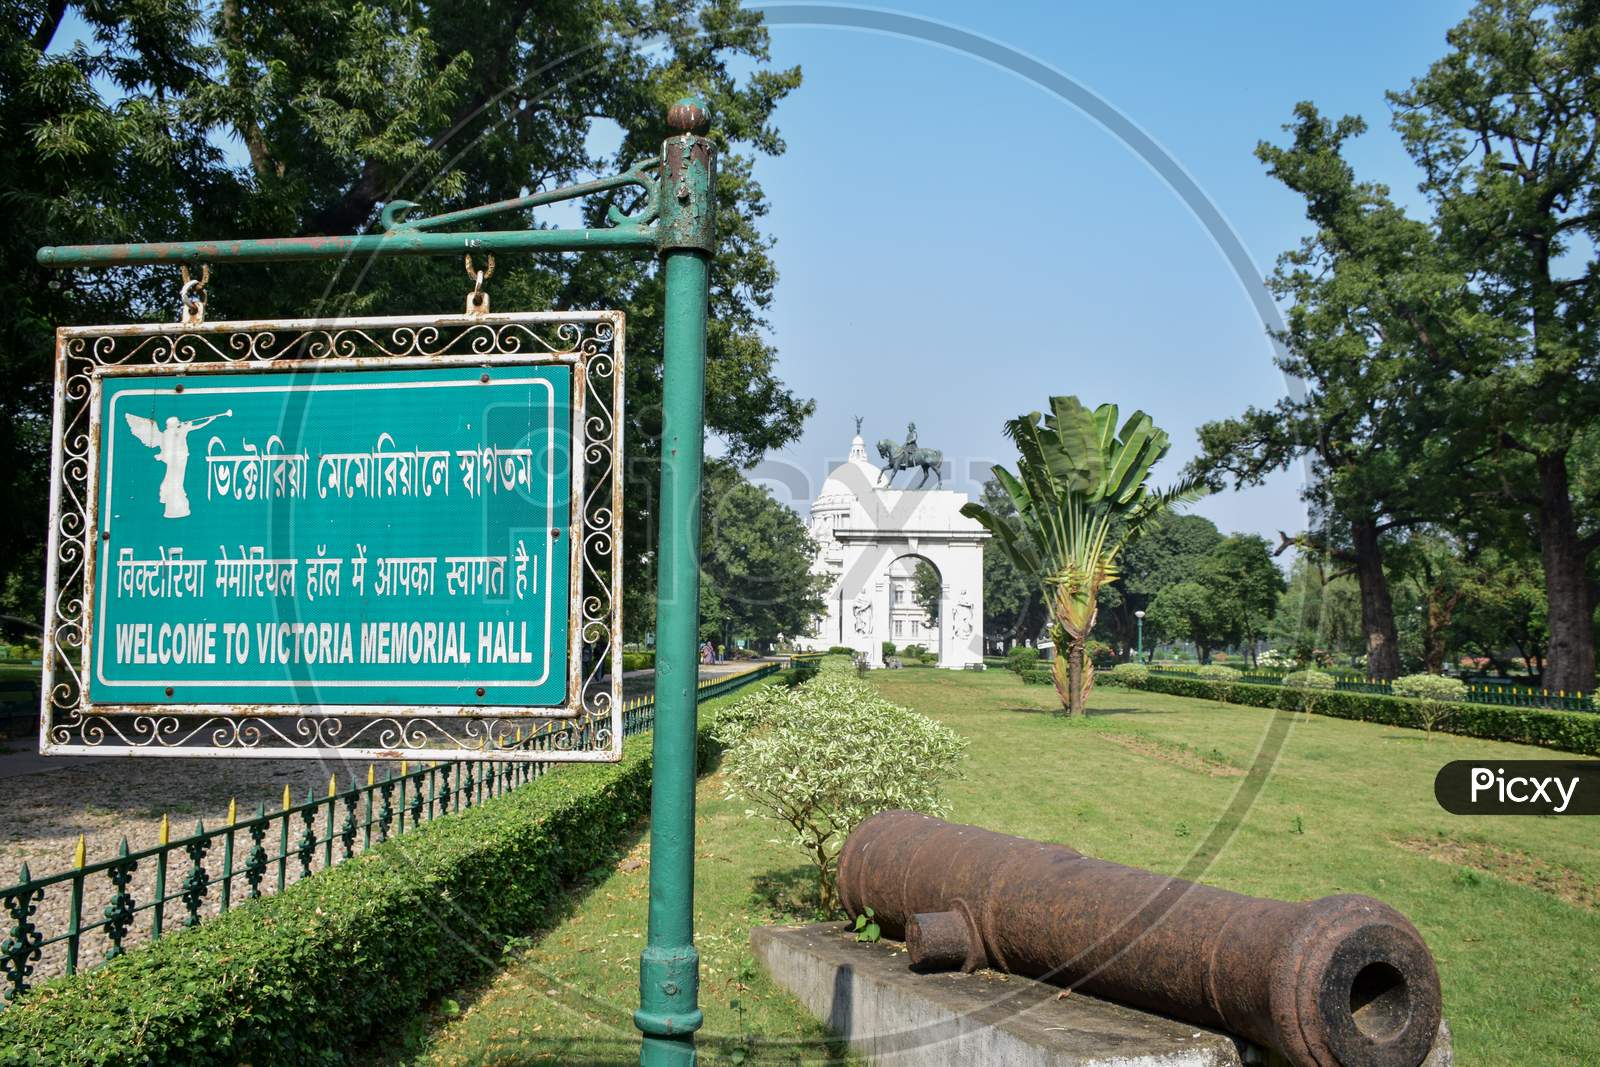 The entrance of Victoria Memorial Hall gardens with the signboard saying welcome.